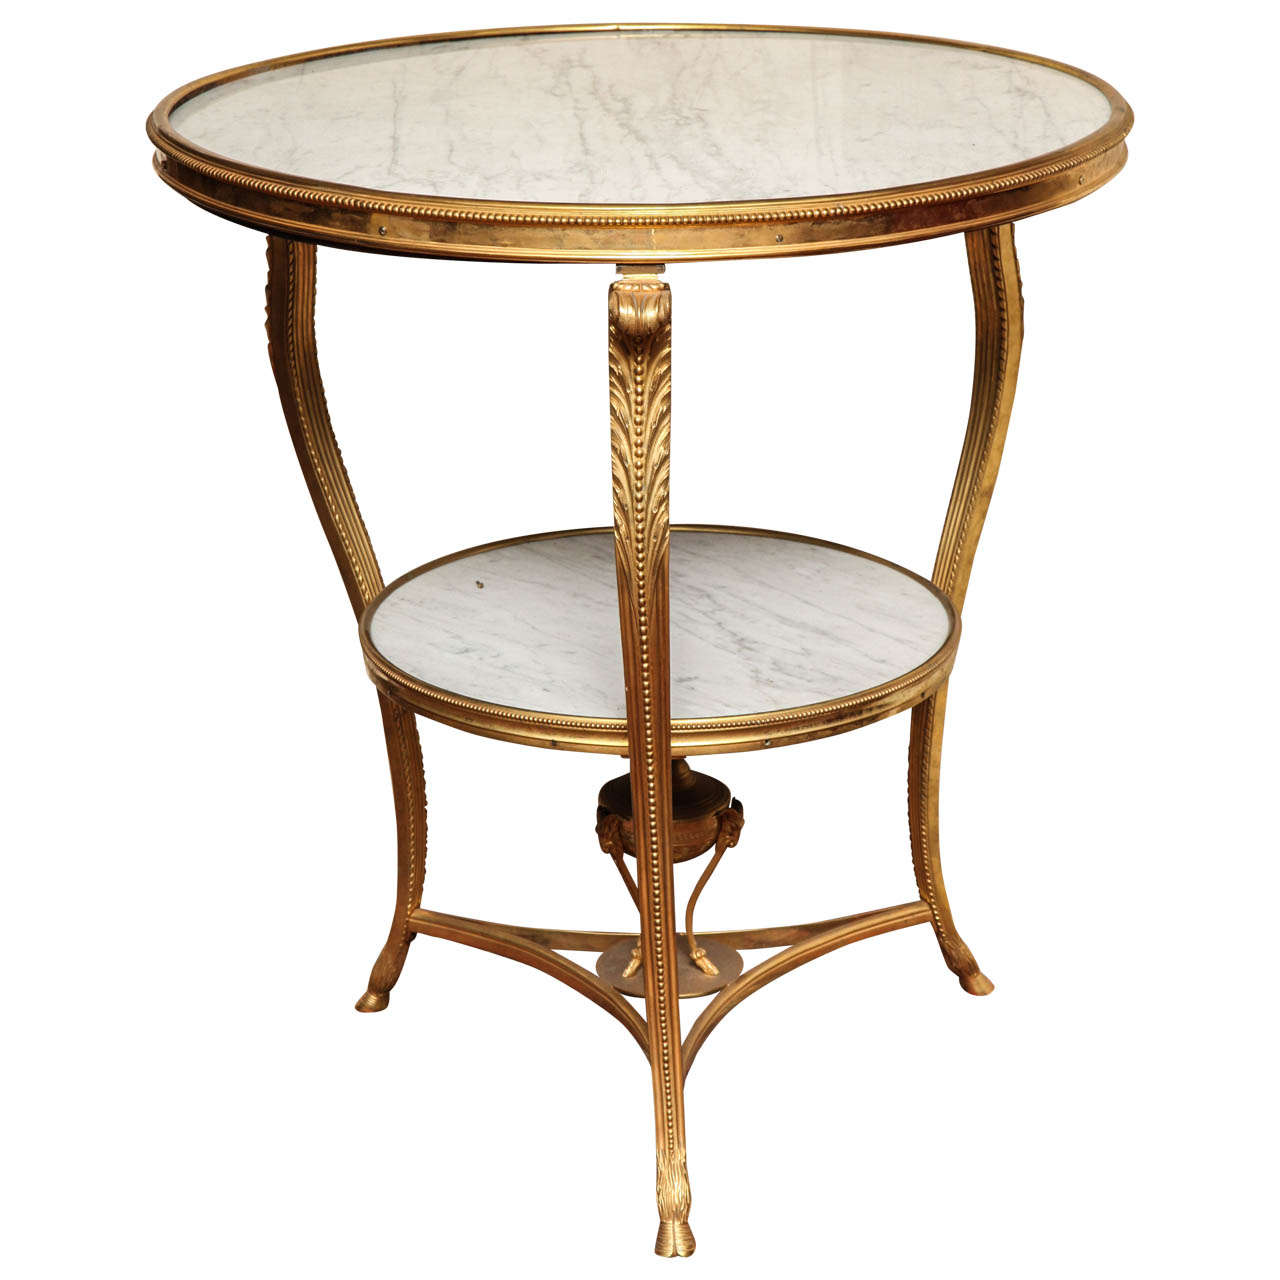 Neoclassical Louis XVI Style Circular Marble and Bronze Two-Tier Centre Table